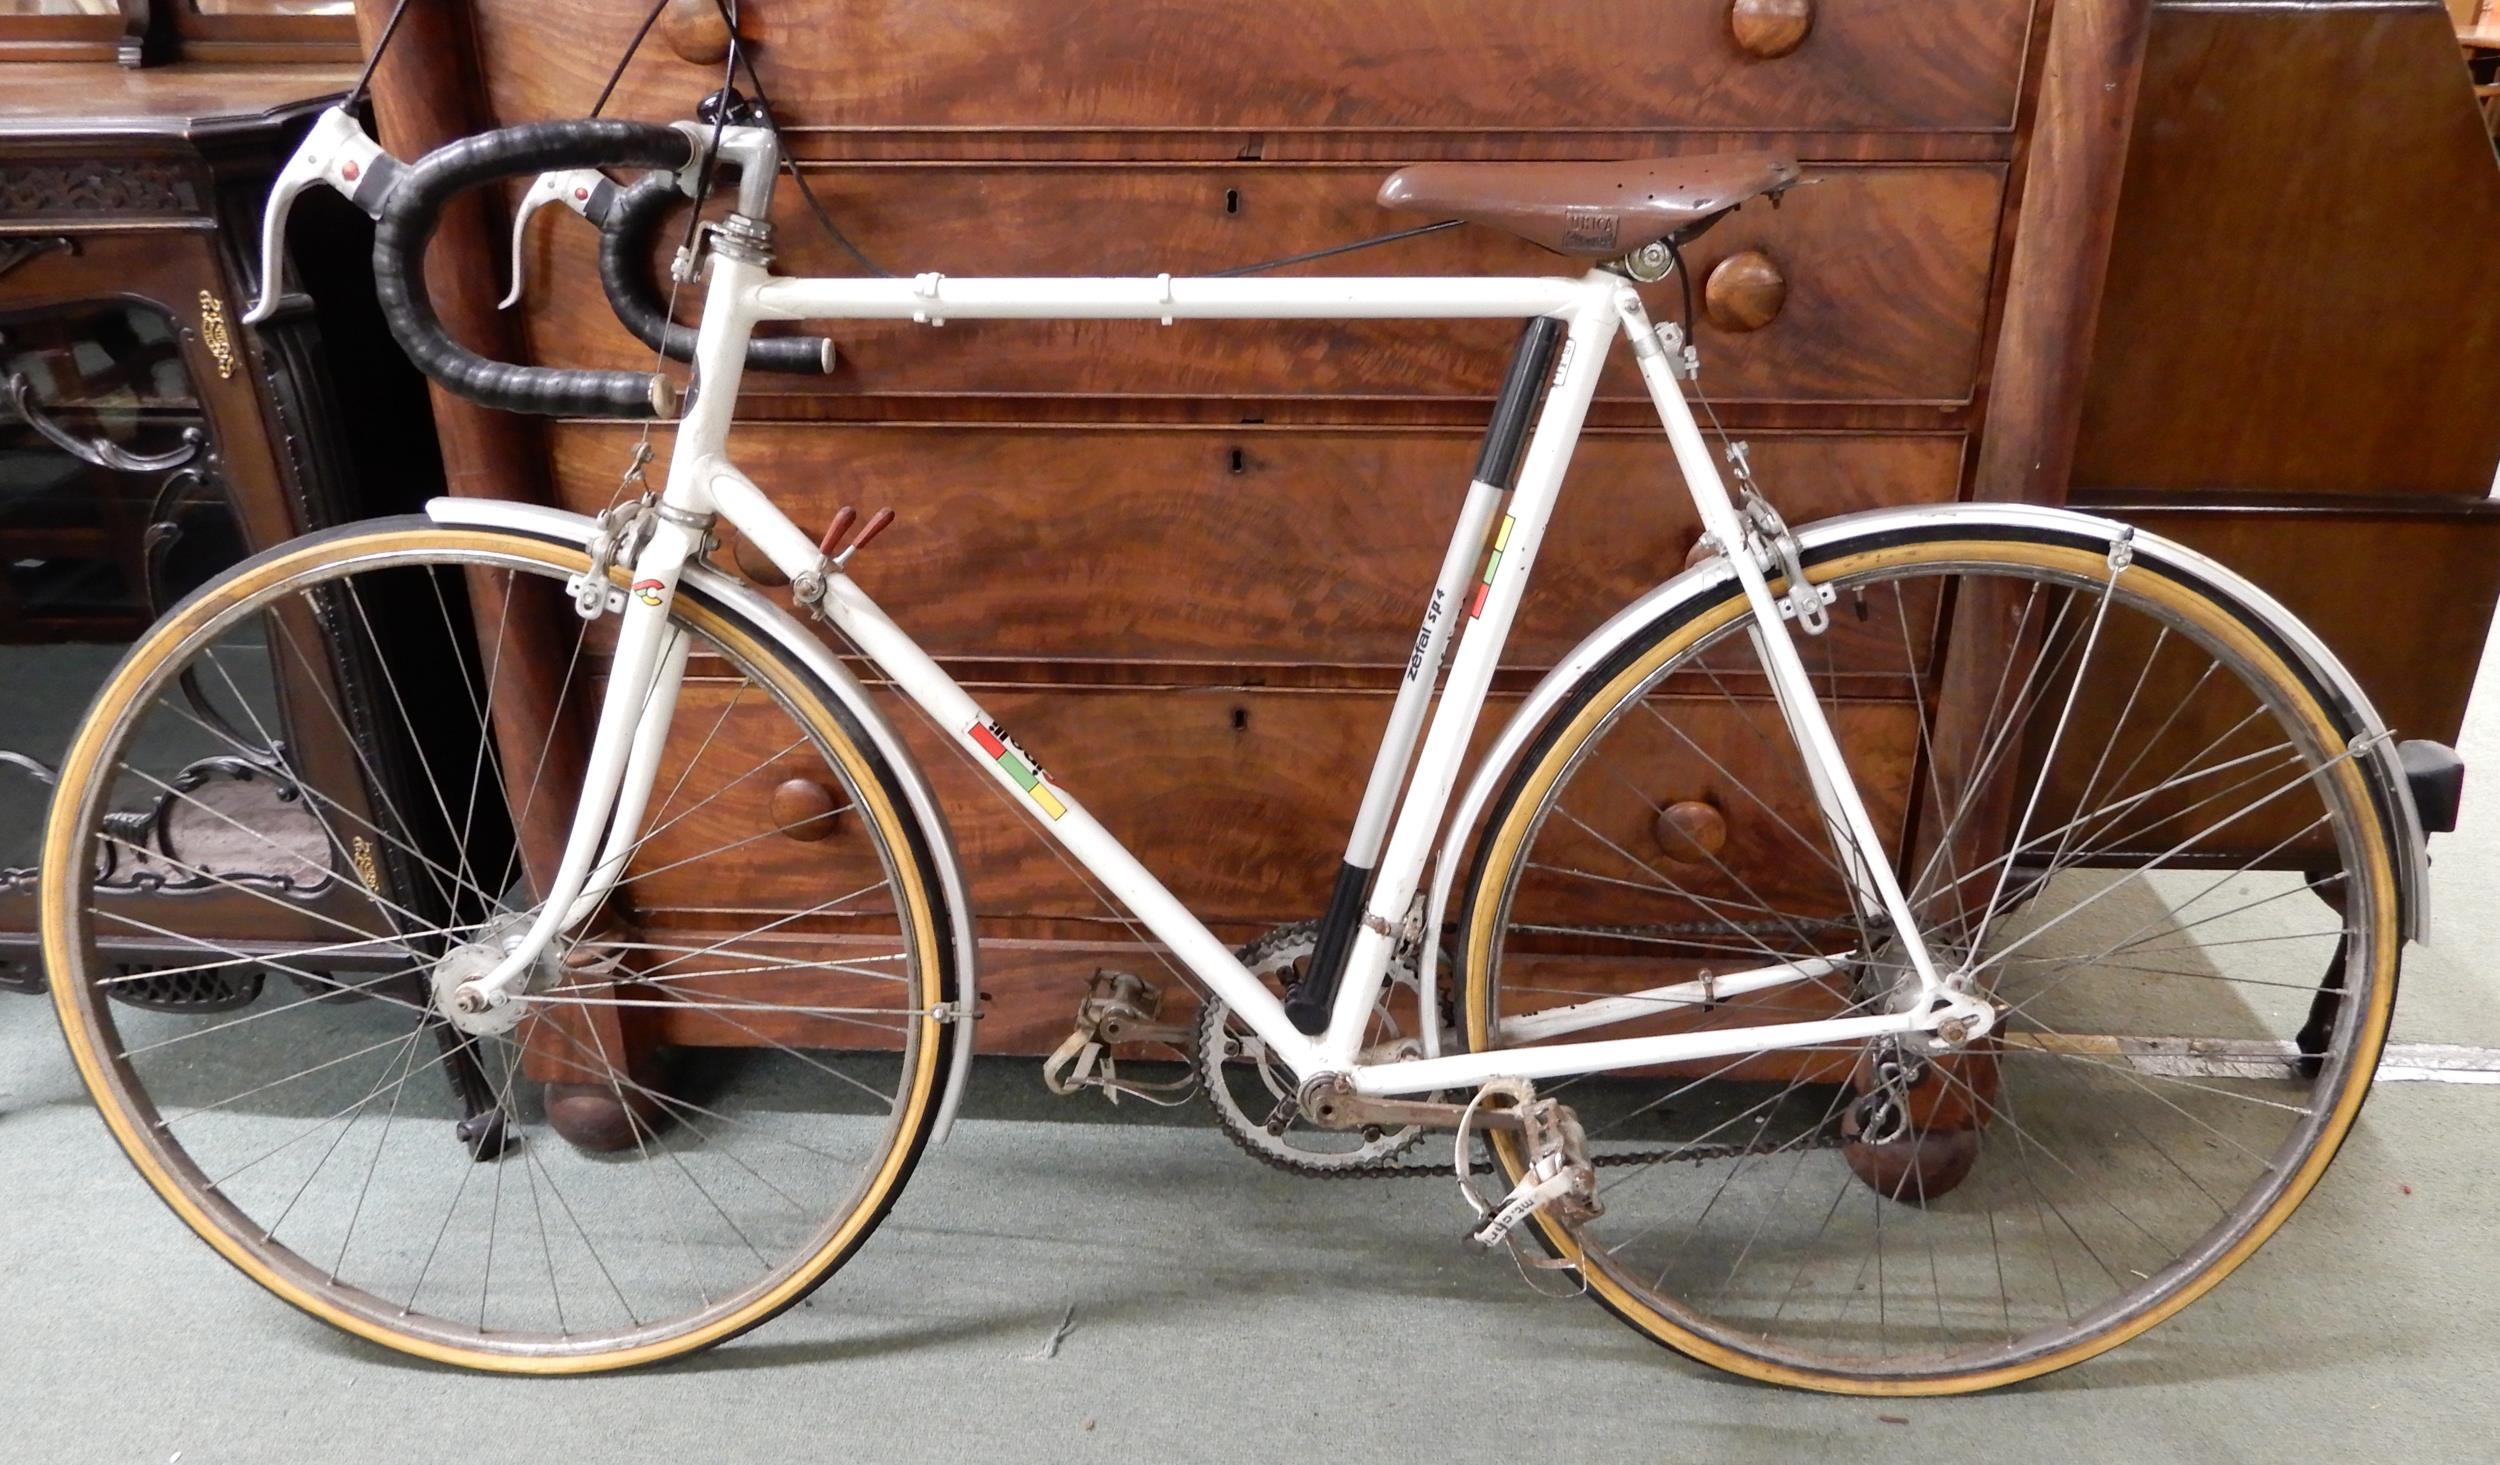 A mid 20th century Cinelli Milano racing bicycle with weinmann brakes and Unica saddle, 24 inch